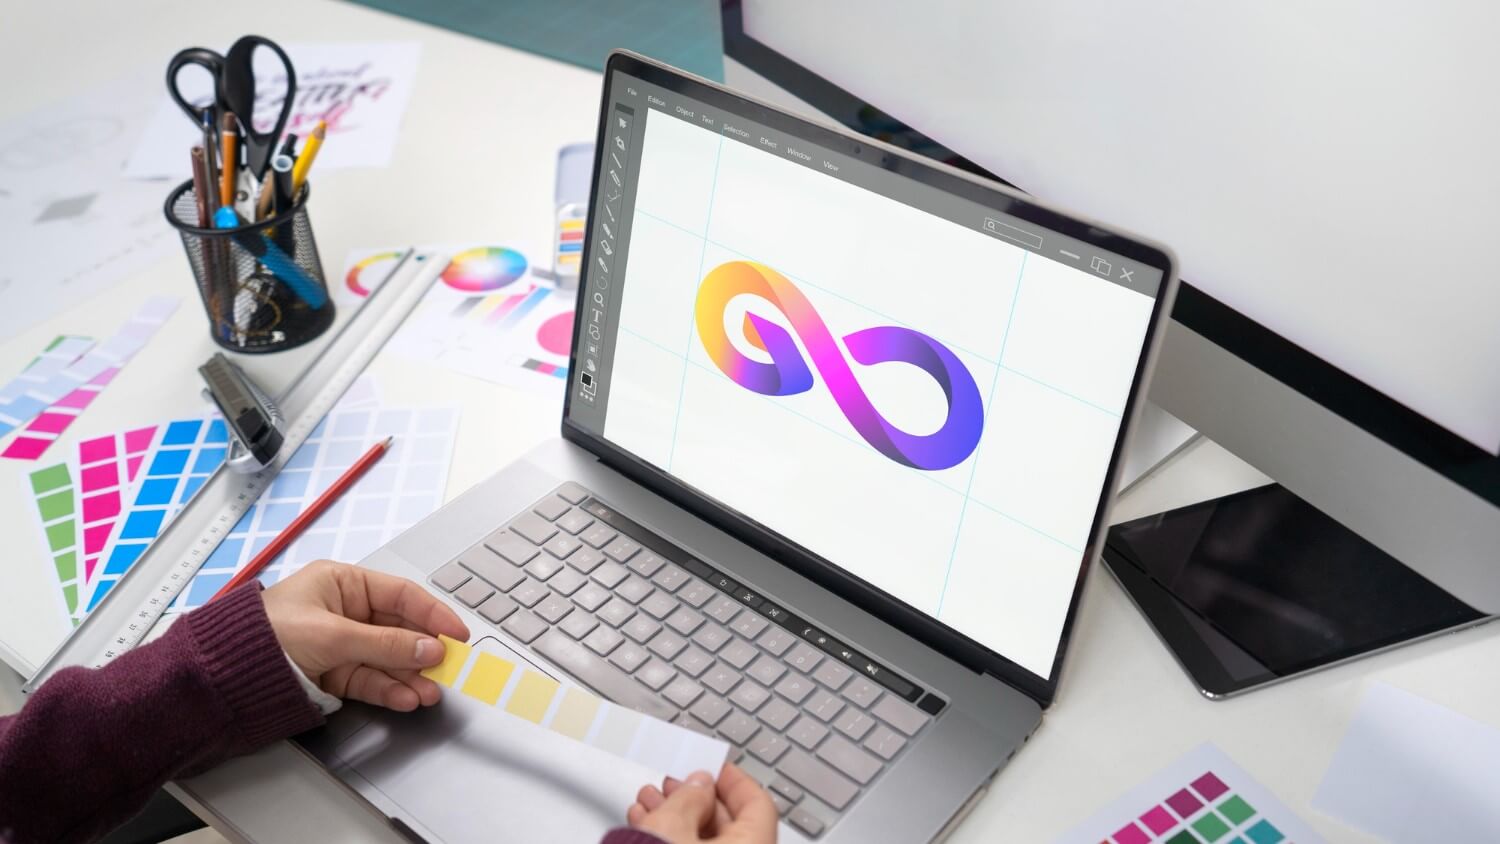 Do You Need a Professional Brand Design? – Yes, and here’s why